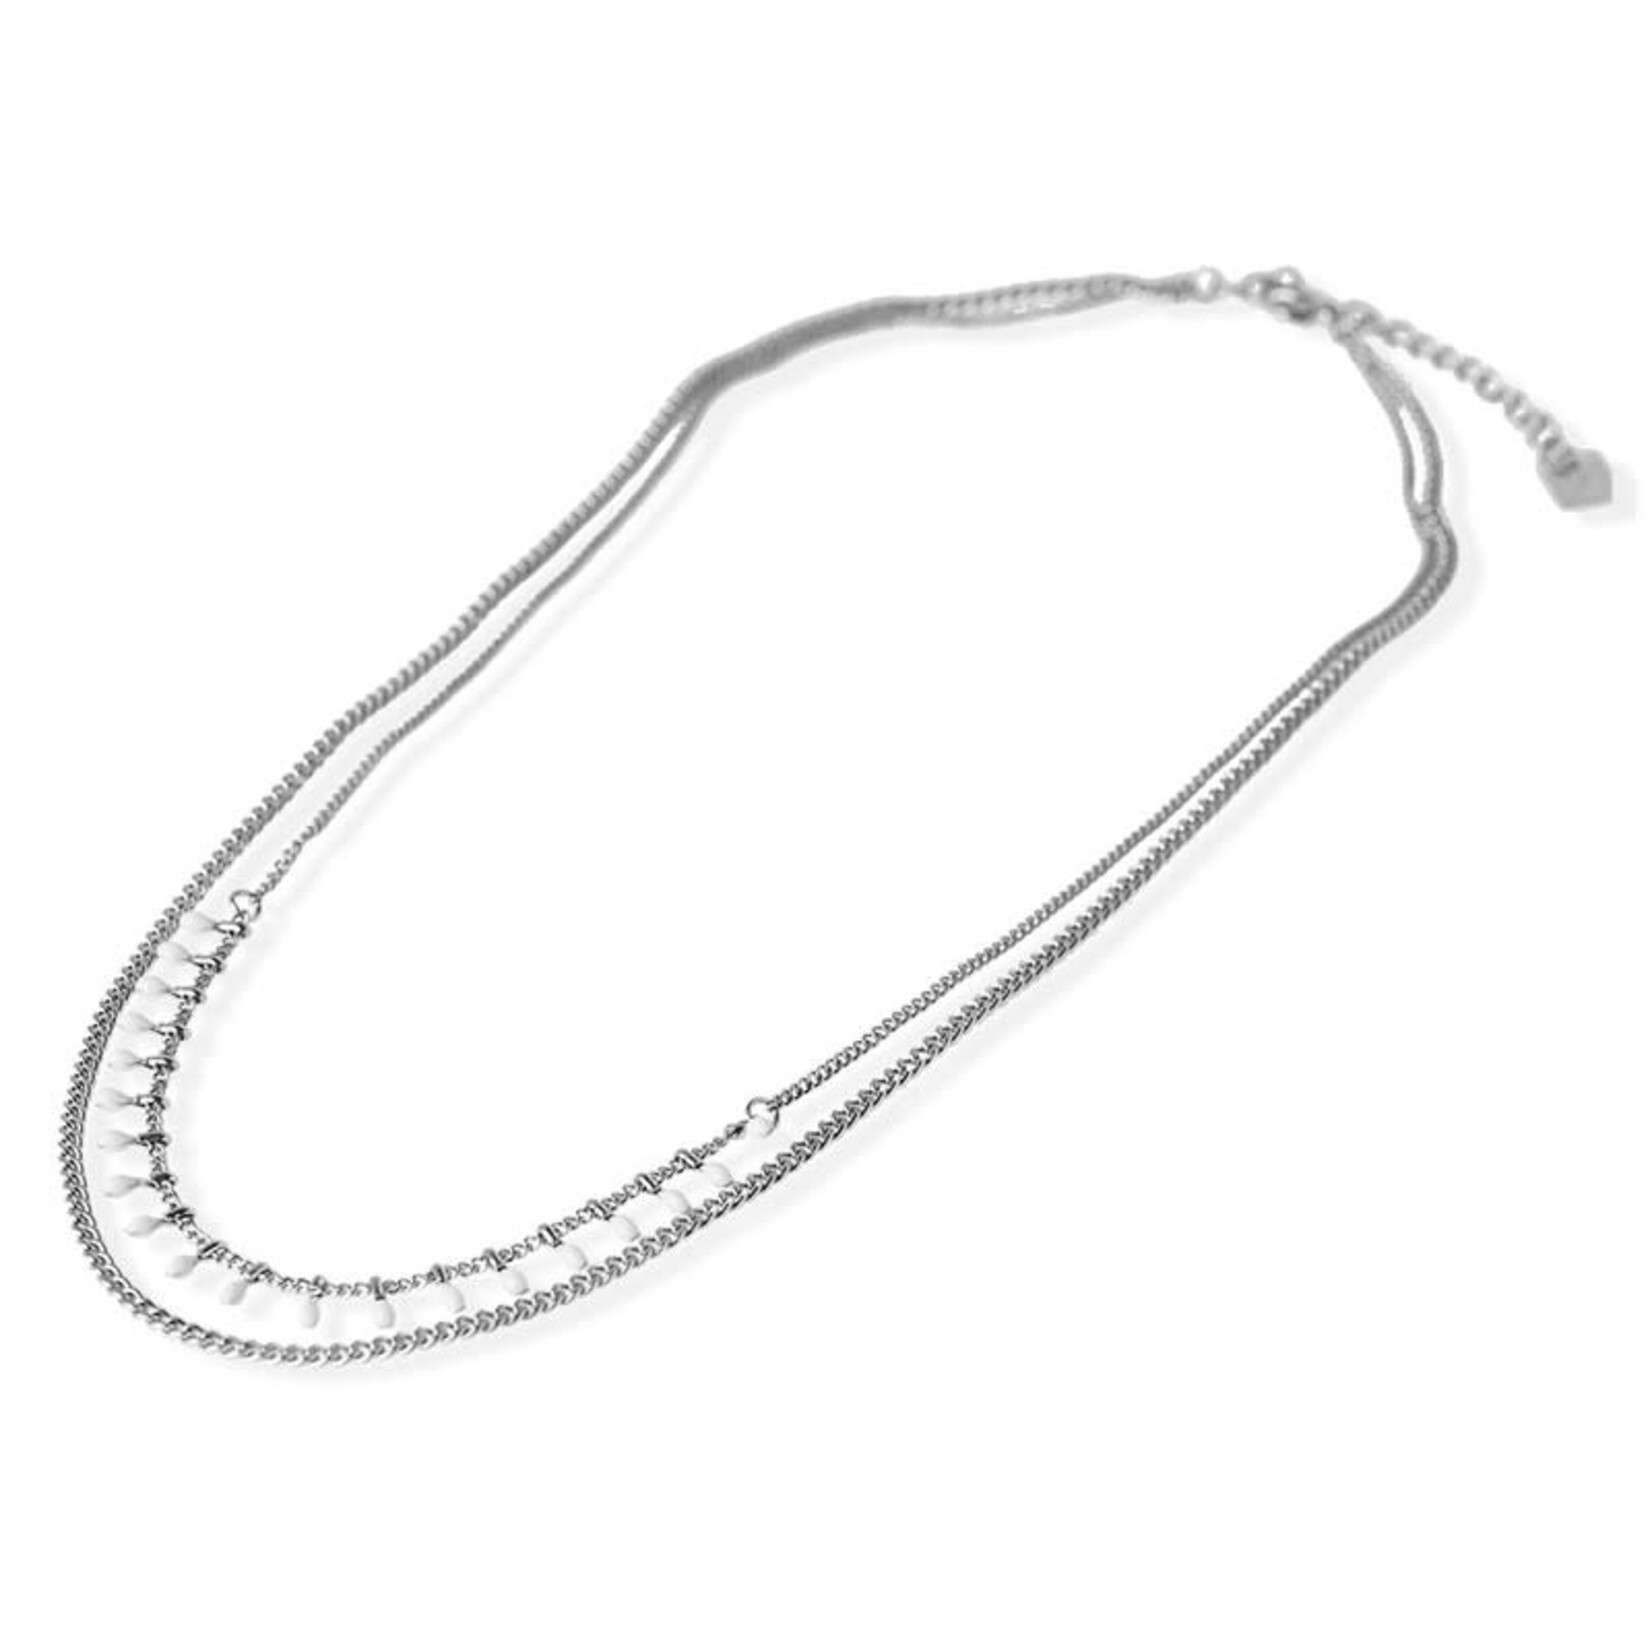 FAB Accessories White Drop Ball & Chain Necklace -